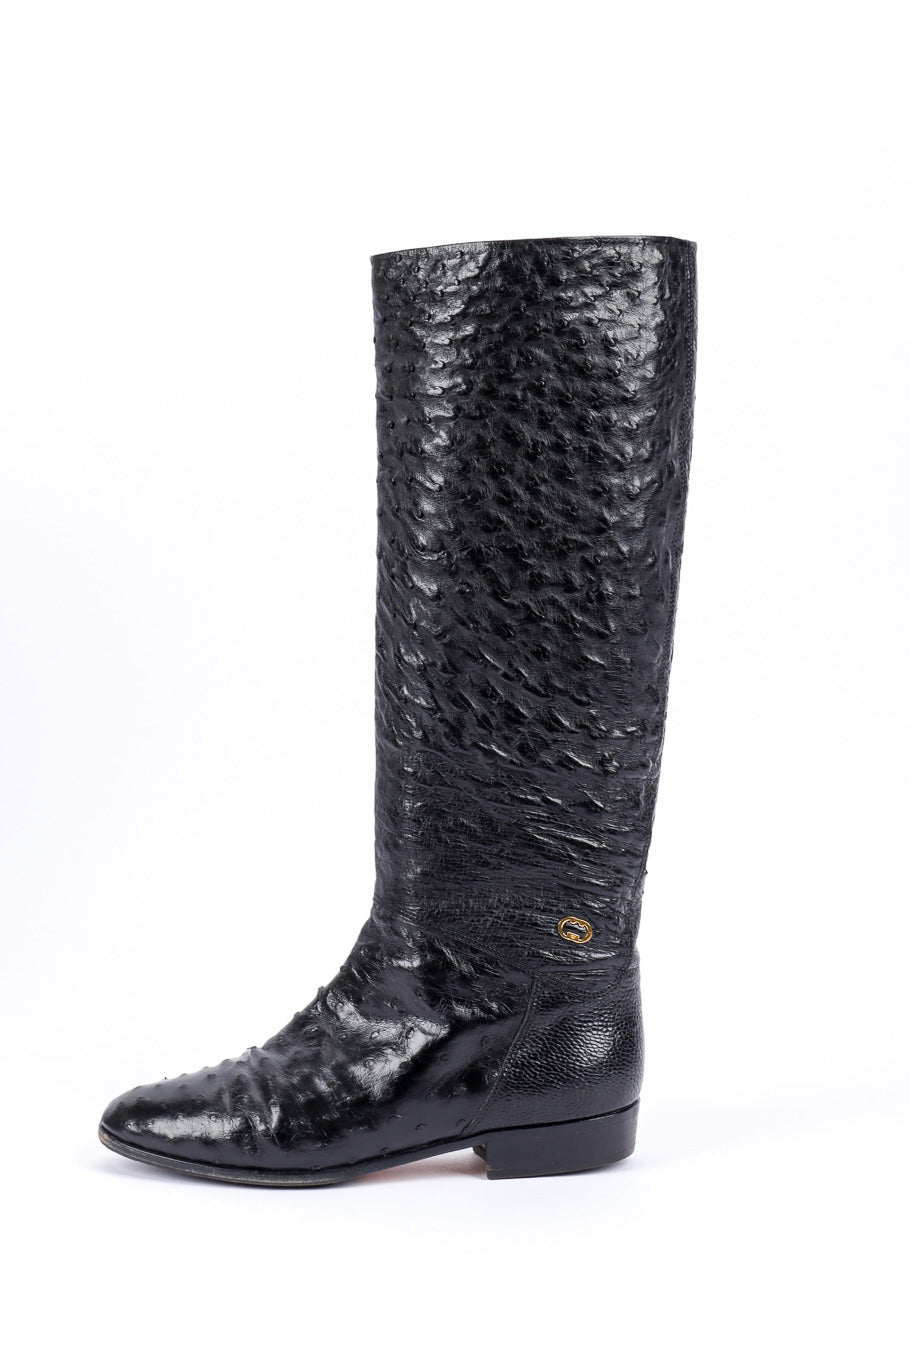 Vintage Gucci Black Ostrich Leather Riding Boot left boot outer view @recessla